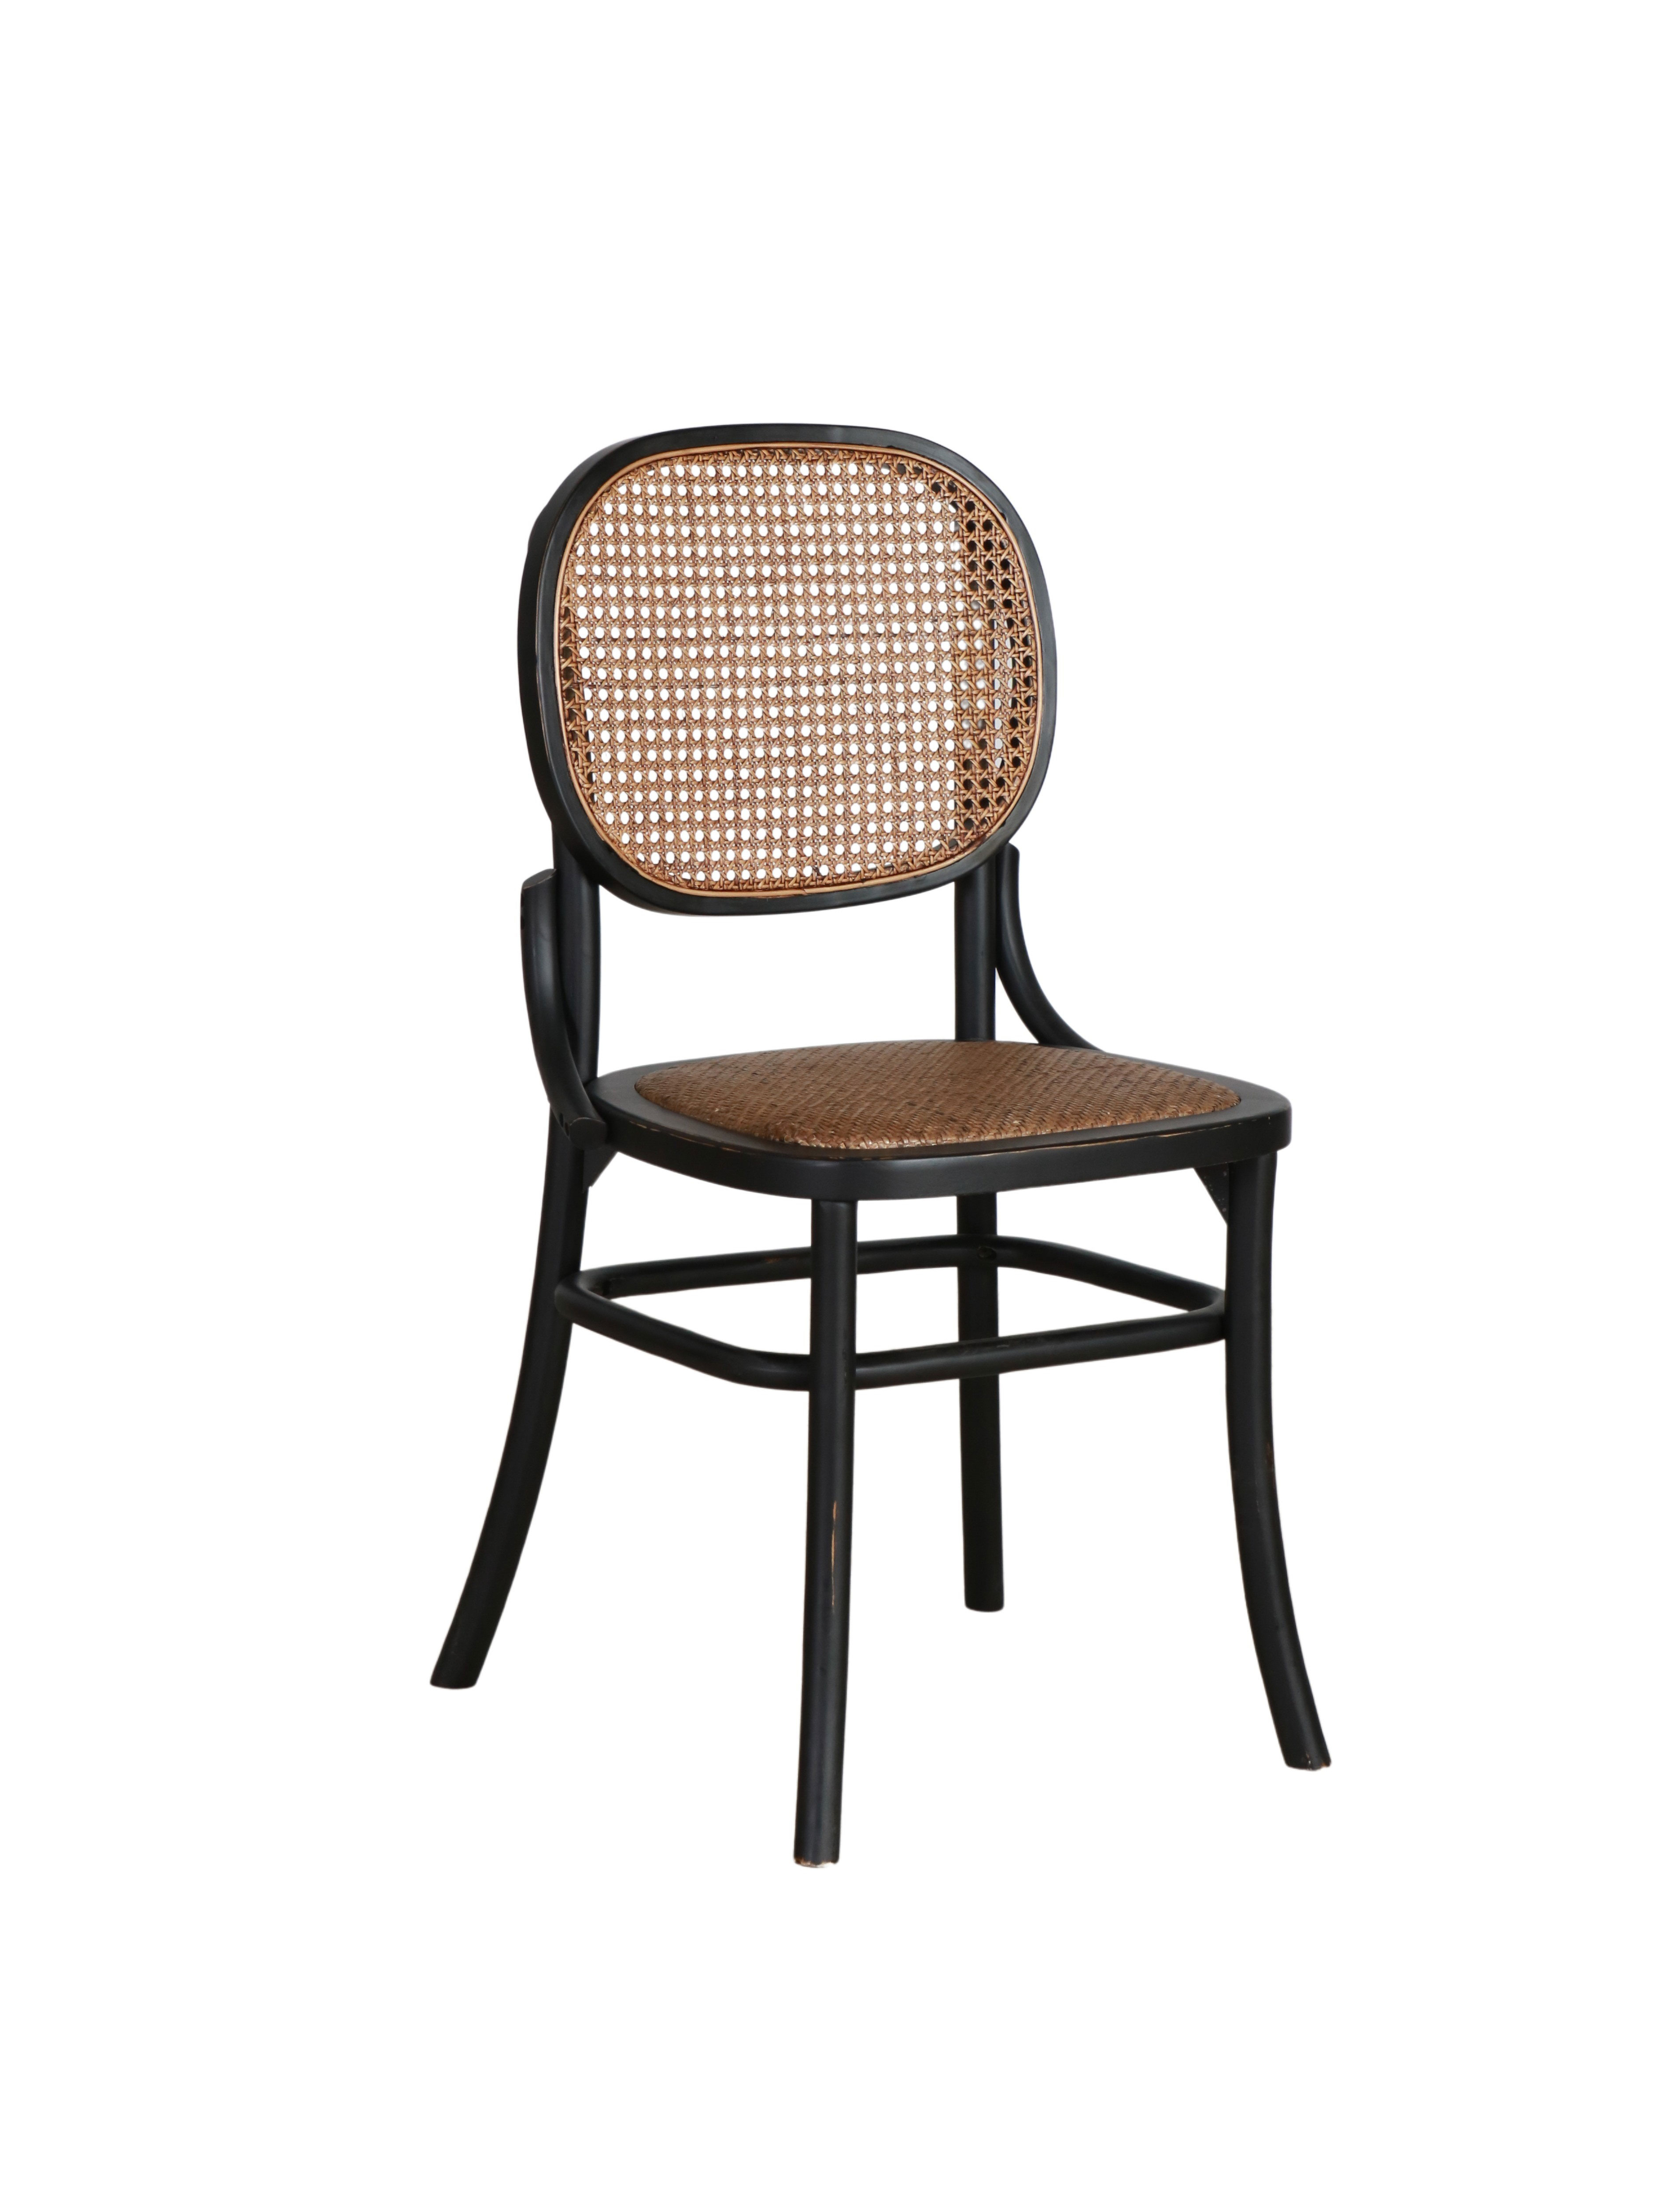  black chinese oak dining chair with rattan back